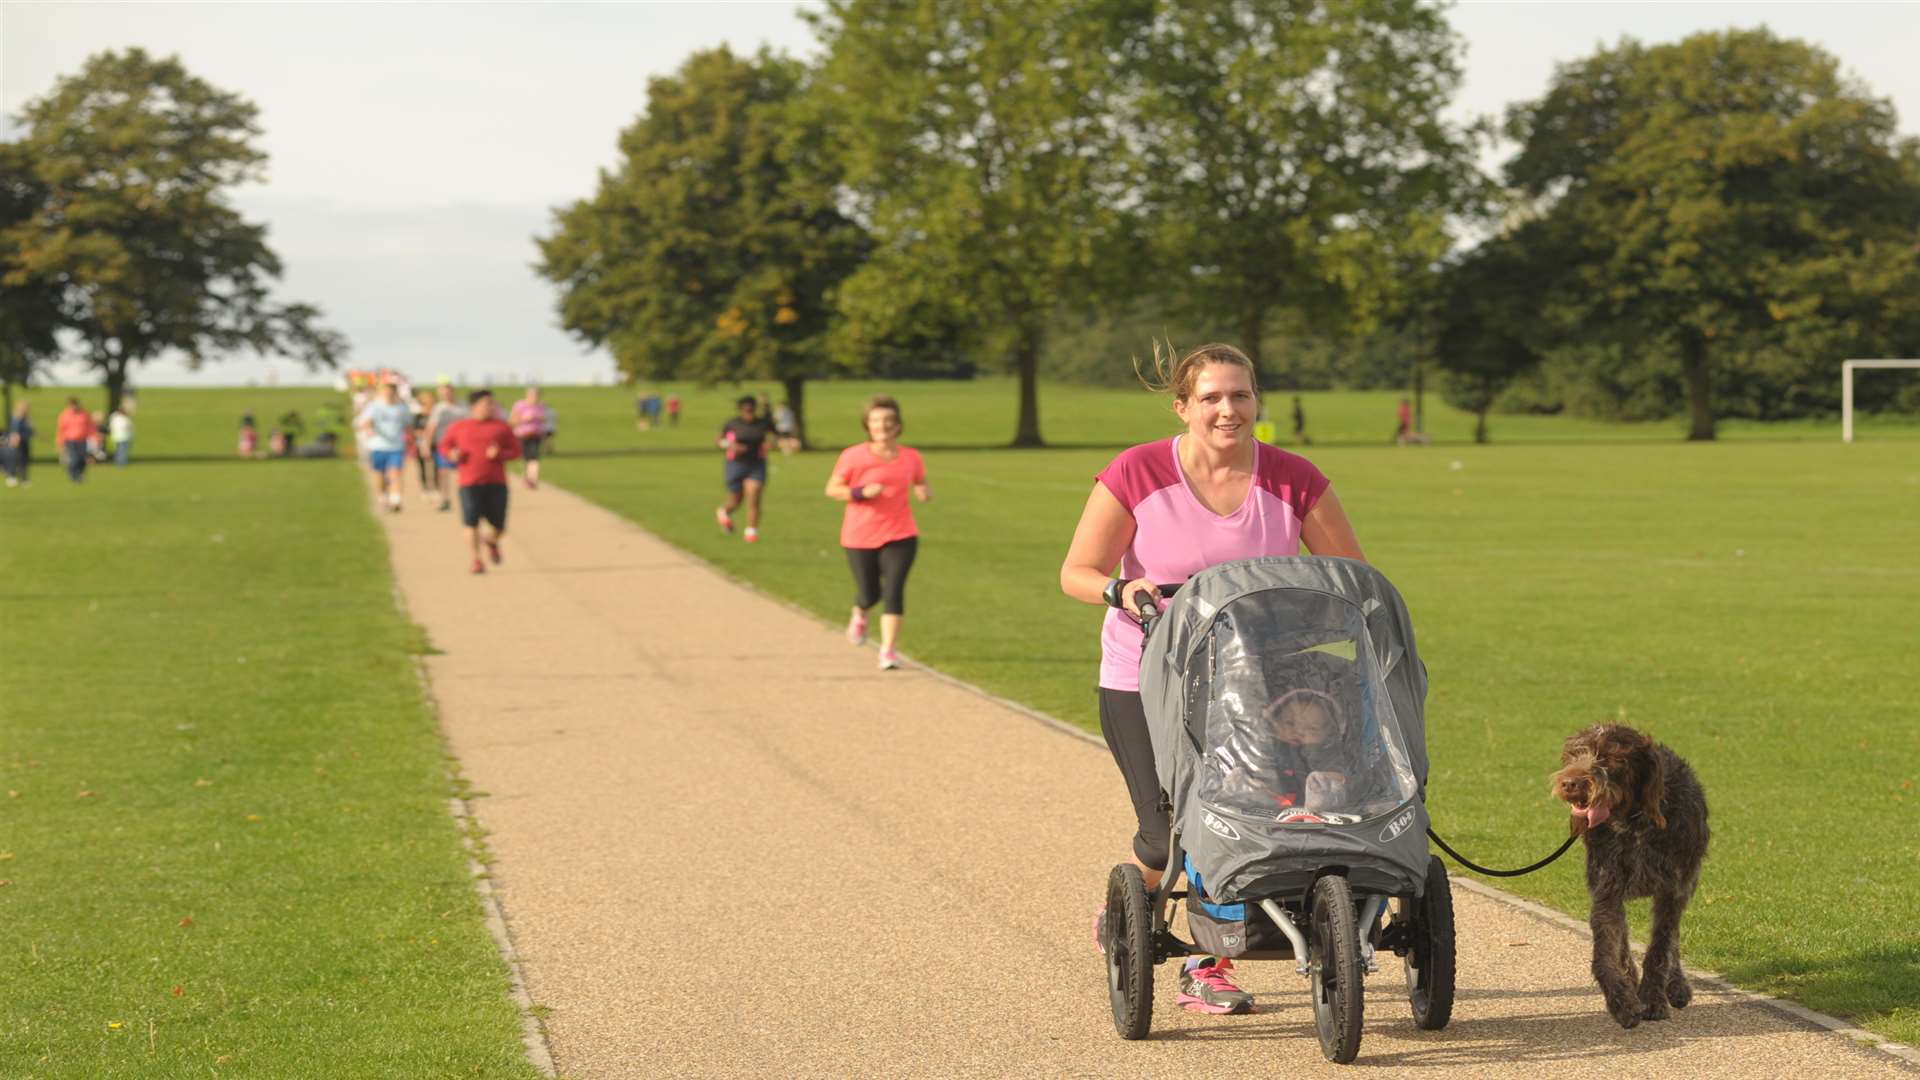 All are welcome: joggers, dogs and babies in pushchairs